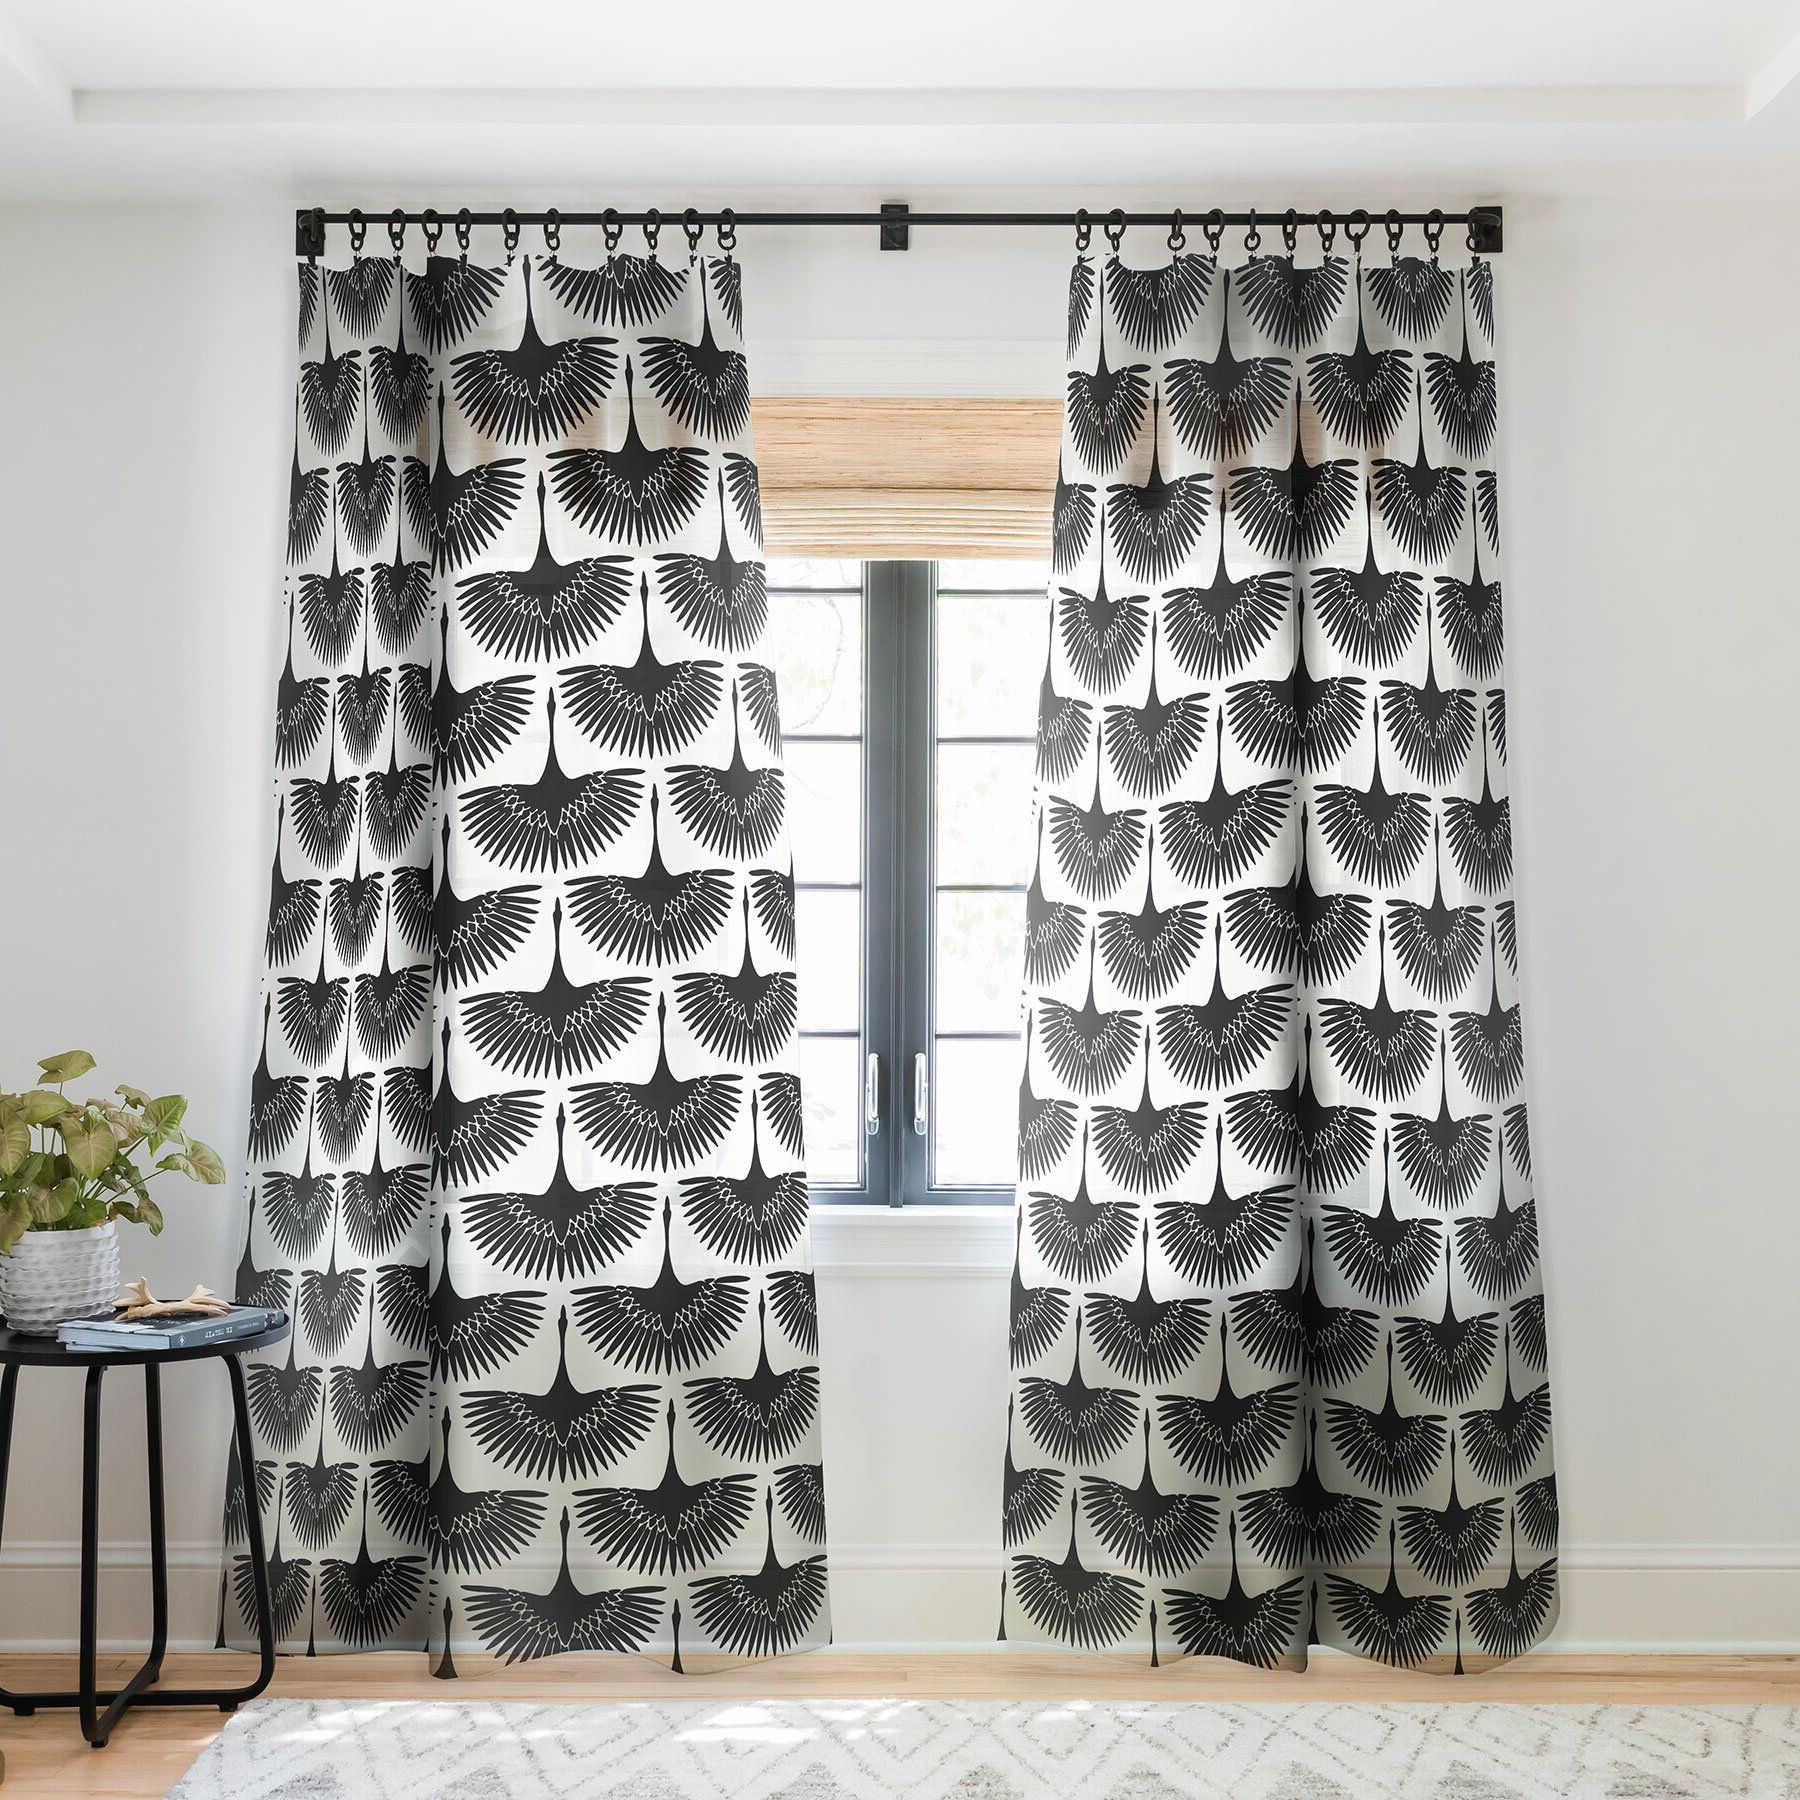 Ink Ivy Ankara Cotton Printed Single Curtain Panels Intended For Famous Caroline Okun Majestic Crane Floral Sheer Pinch Pleat Single Curtain Panel (View 17 of 22)